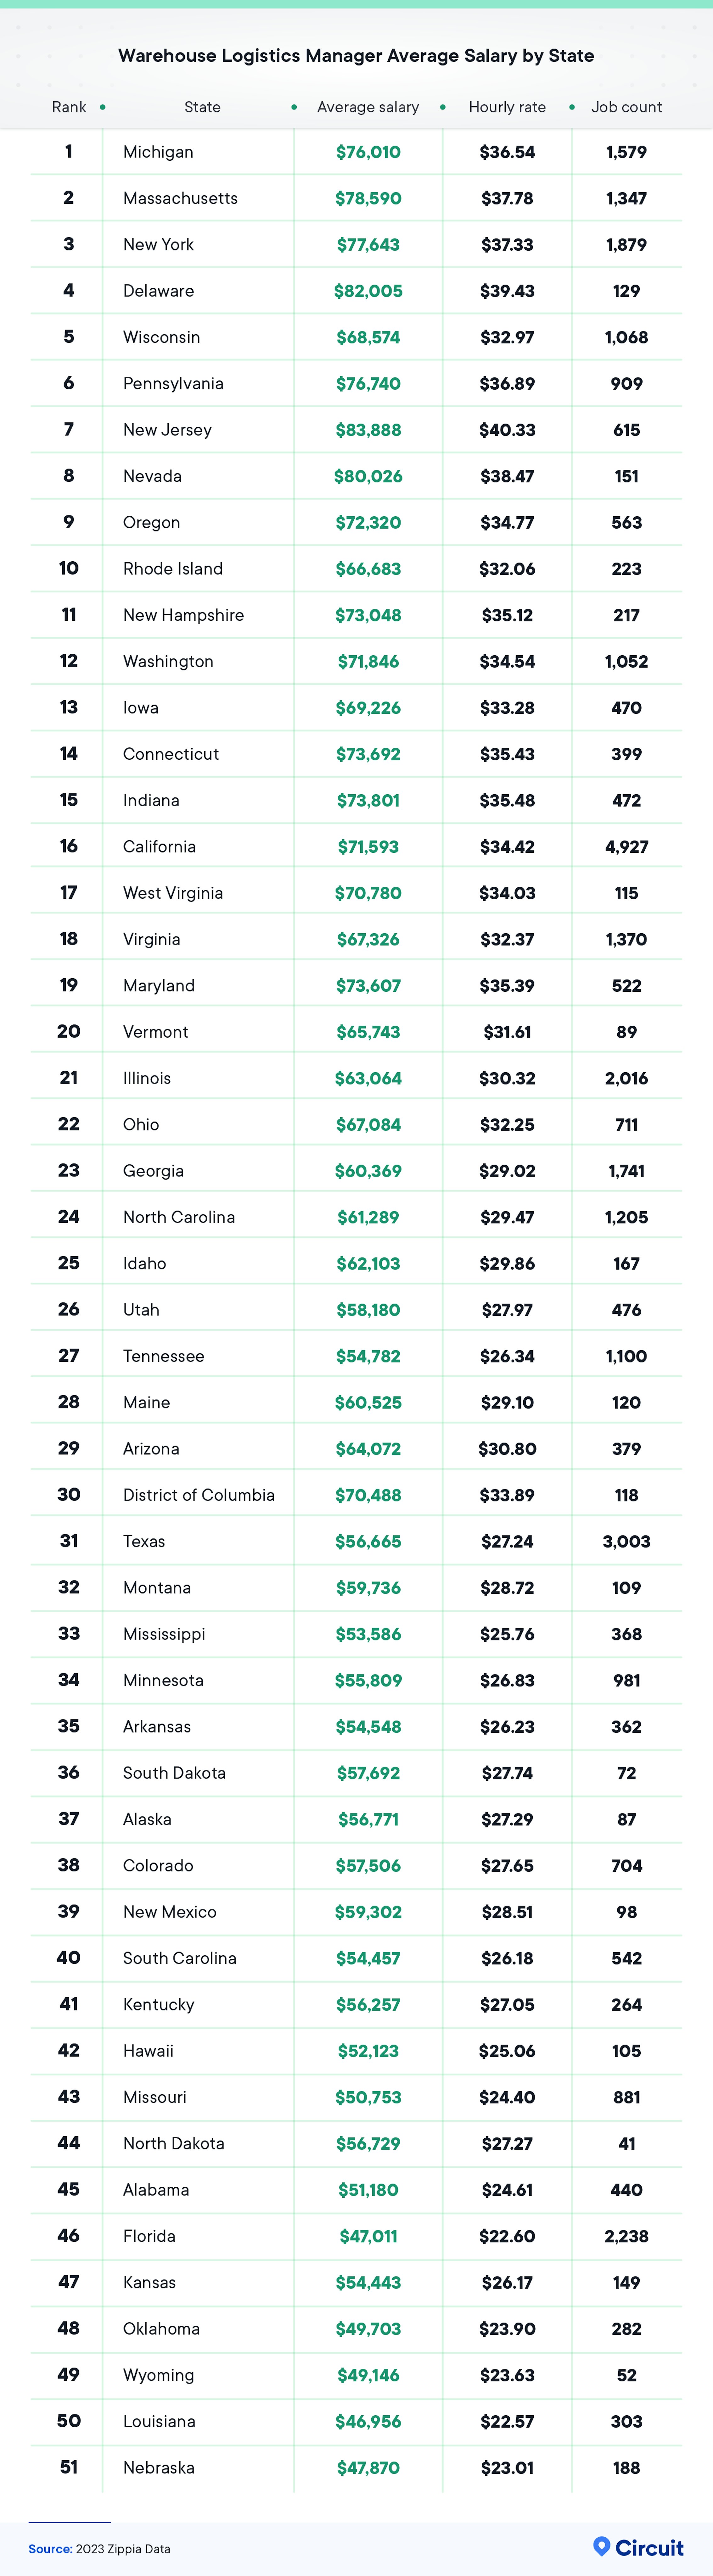 Warehouse logistics manager average salary by state